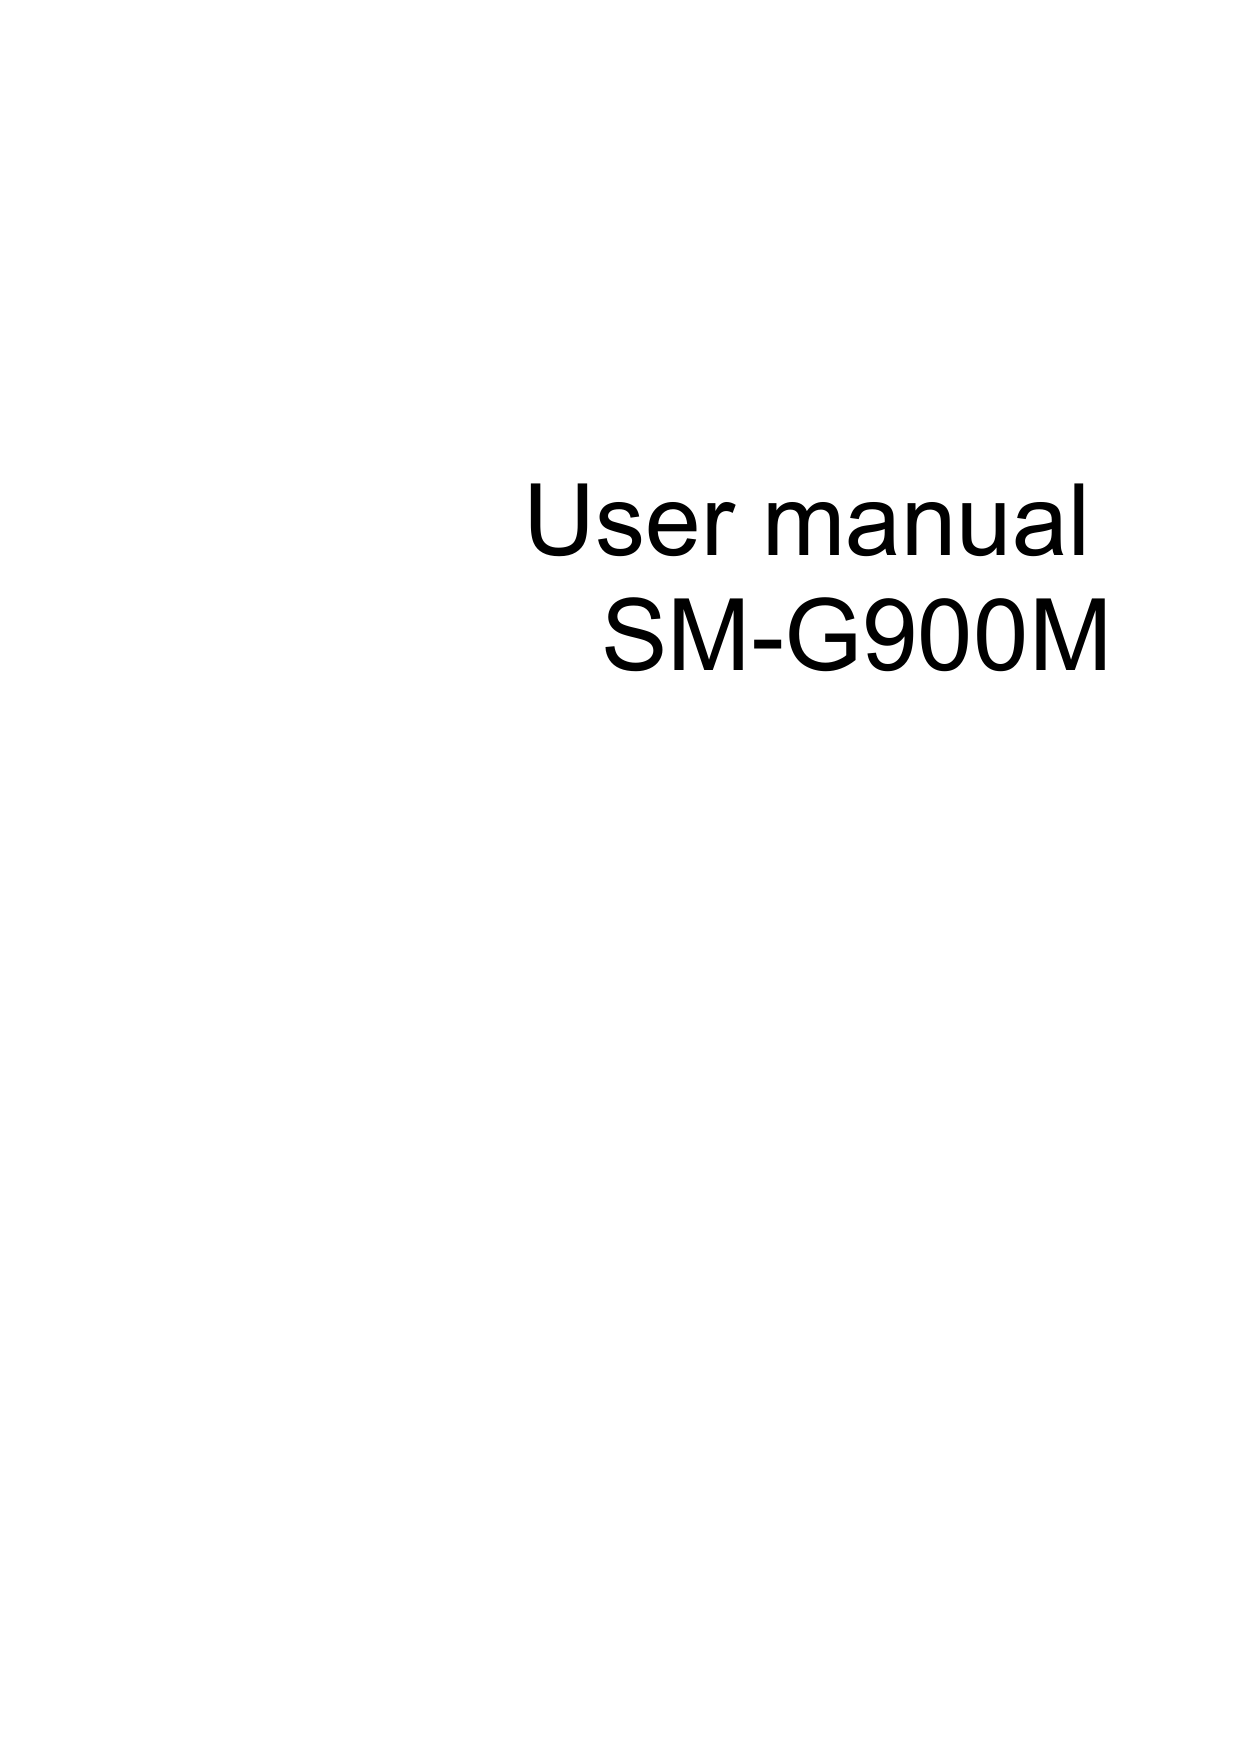         User manual SM-G900M          This device is capable of operating in Wi-Fi mode in the 2.4 and 5 GHz bands.   The FCC requires that devices operating within 5.15-5.25 GHz may only be used indoors, not outside, in order to avoid interference with MobileSatellite Services (MSS).    Therefore, do not use this device outside as a Wi-Fi hotspot or in Wi-Fi Direct mode outside when using the 5.15-5.25 GHz frequencies.    Draft 6.1 2012-09-08 Only for Approval 